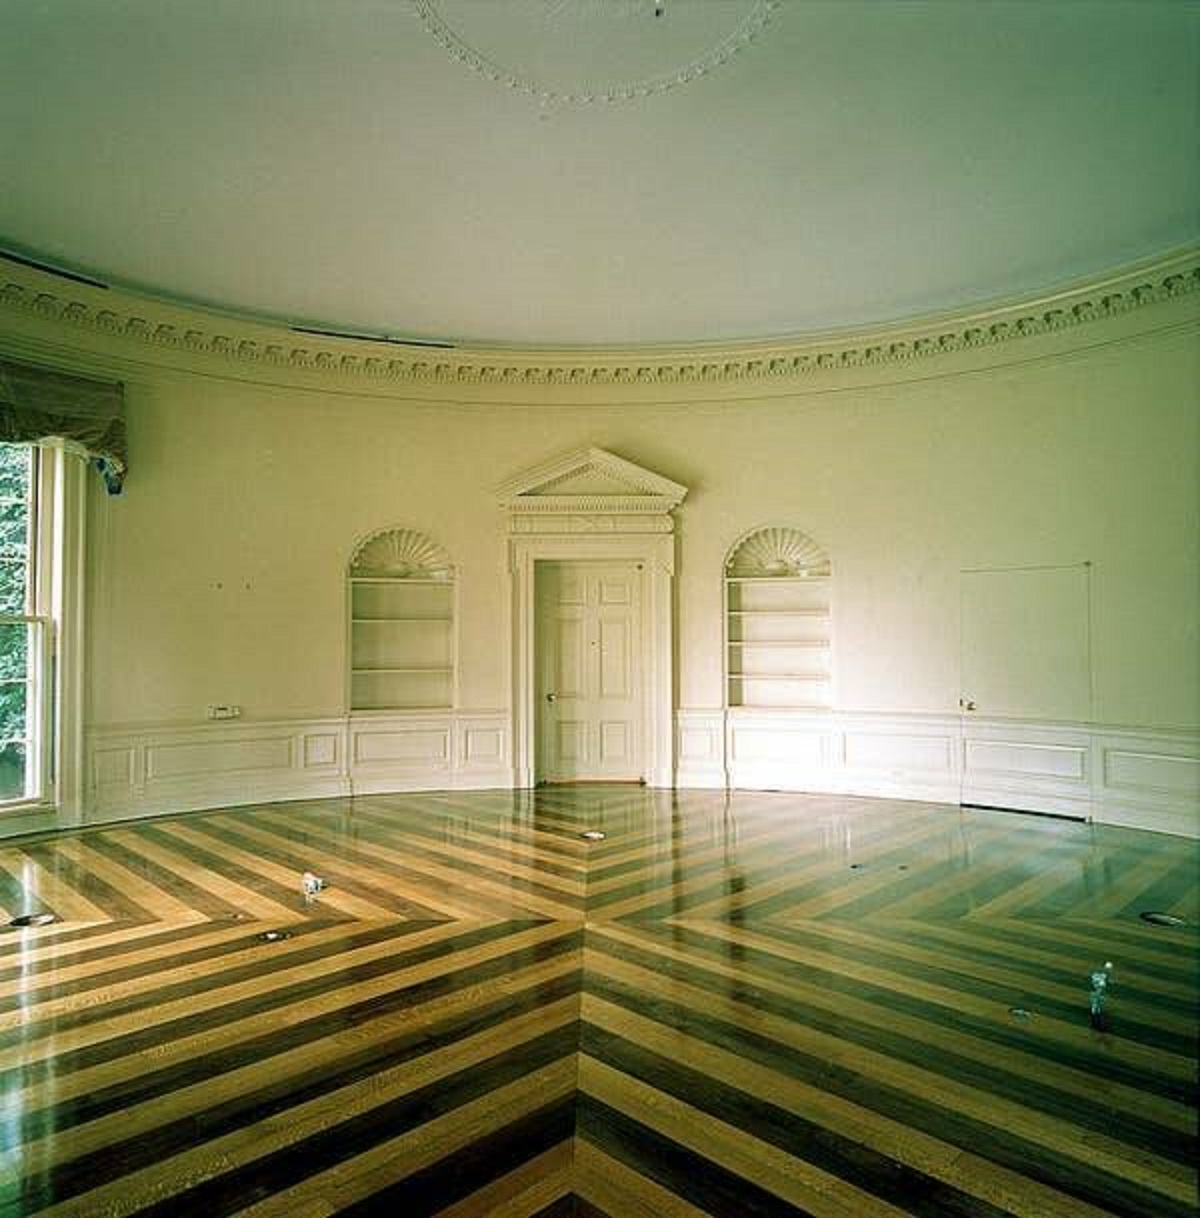 This is what the Oval Office looks like completely empty: